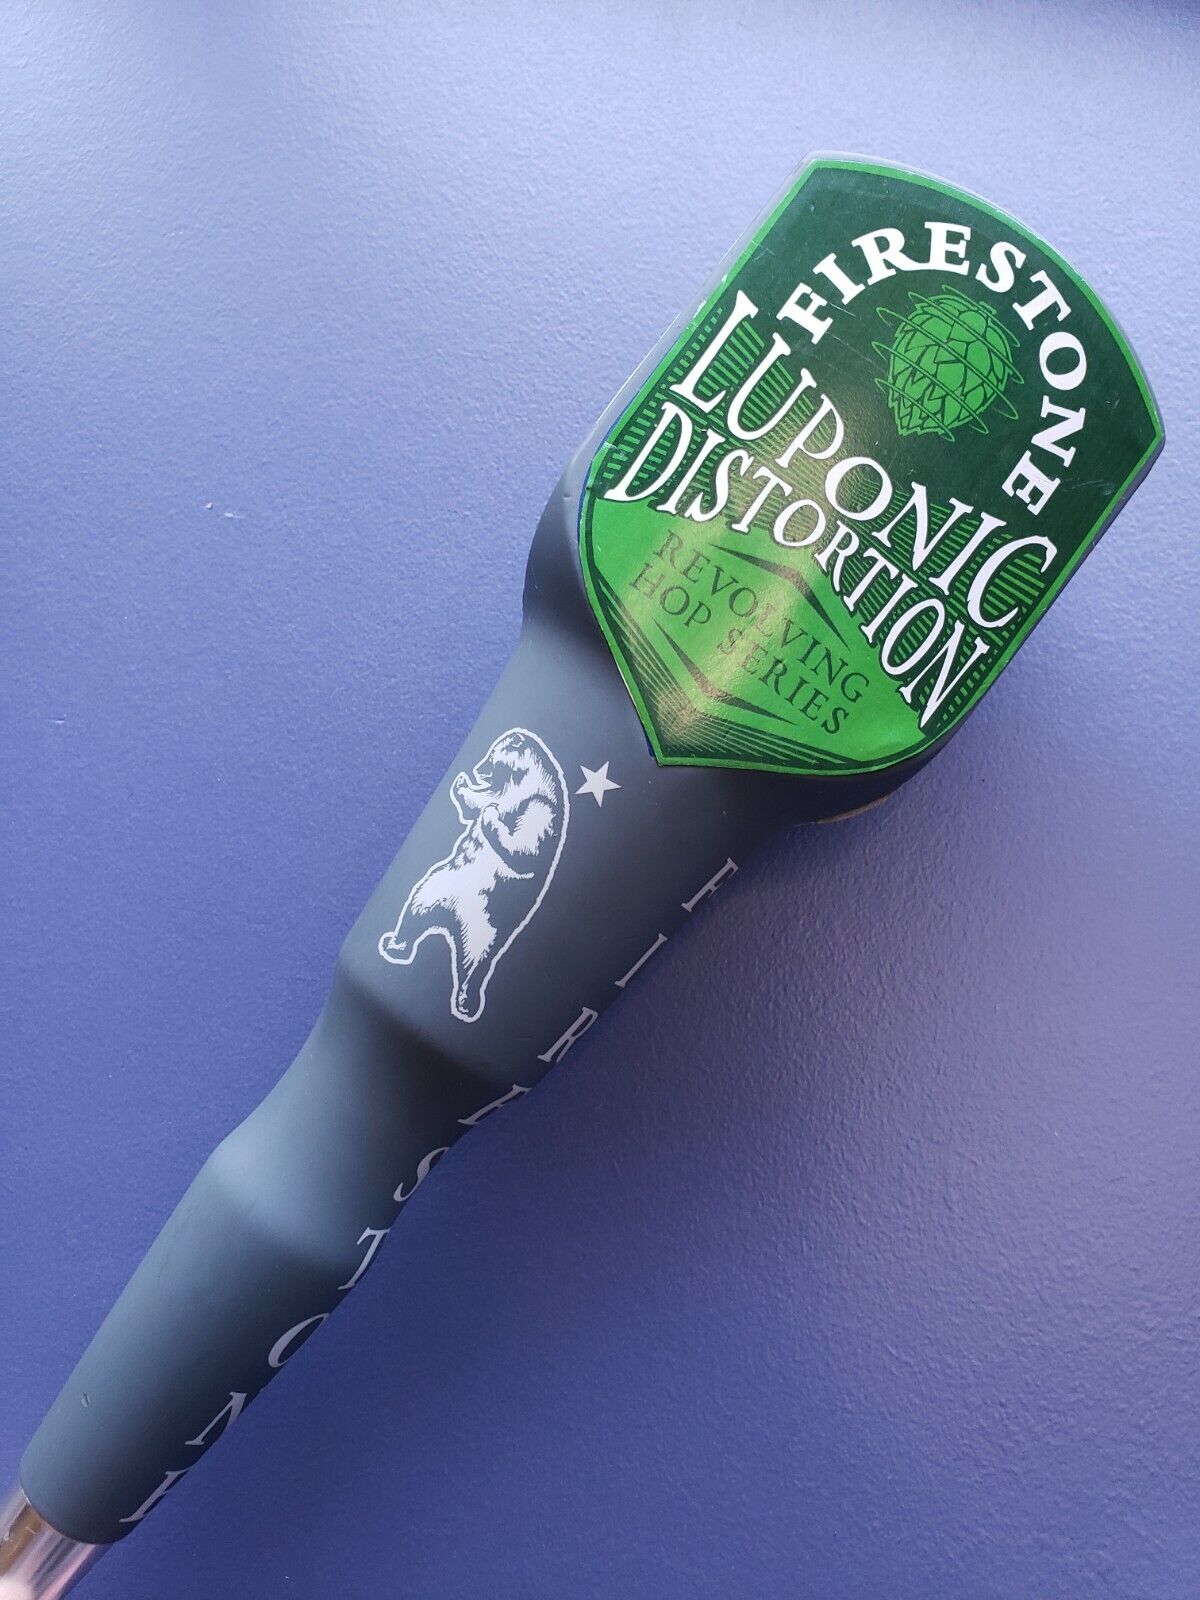 Firestone Walker Brewing 3-sided Tap Handle - Luponic Distortion Ipa